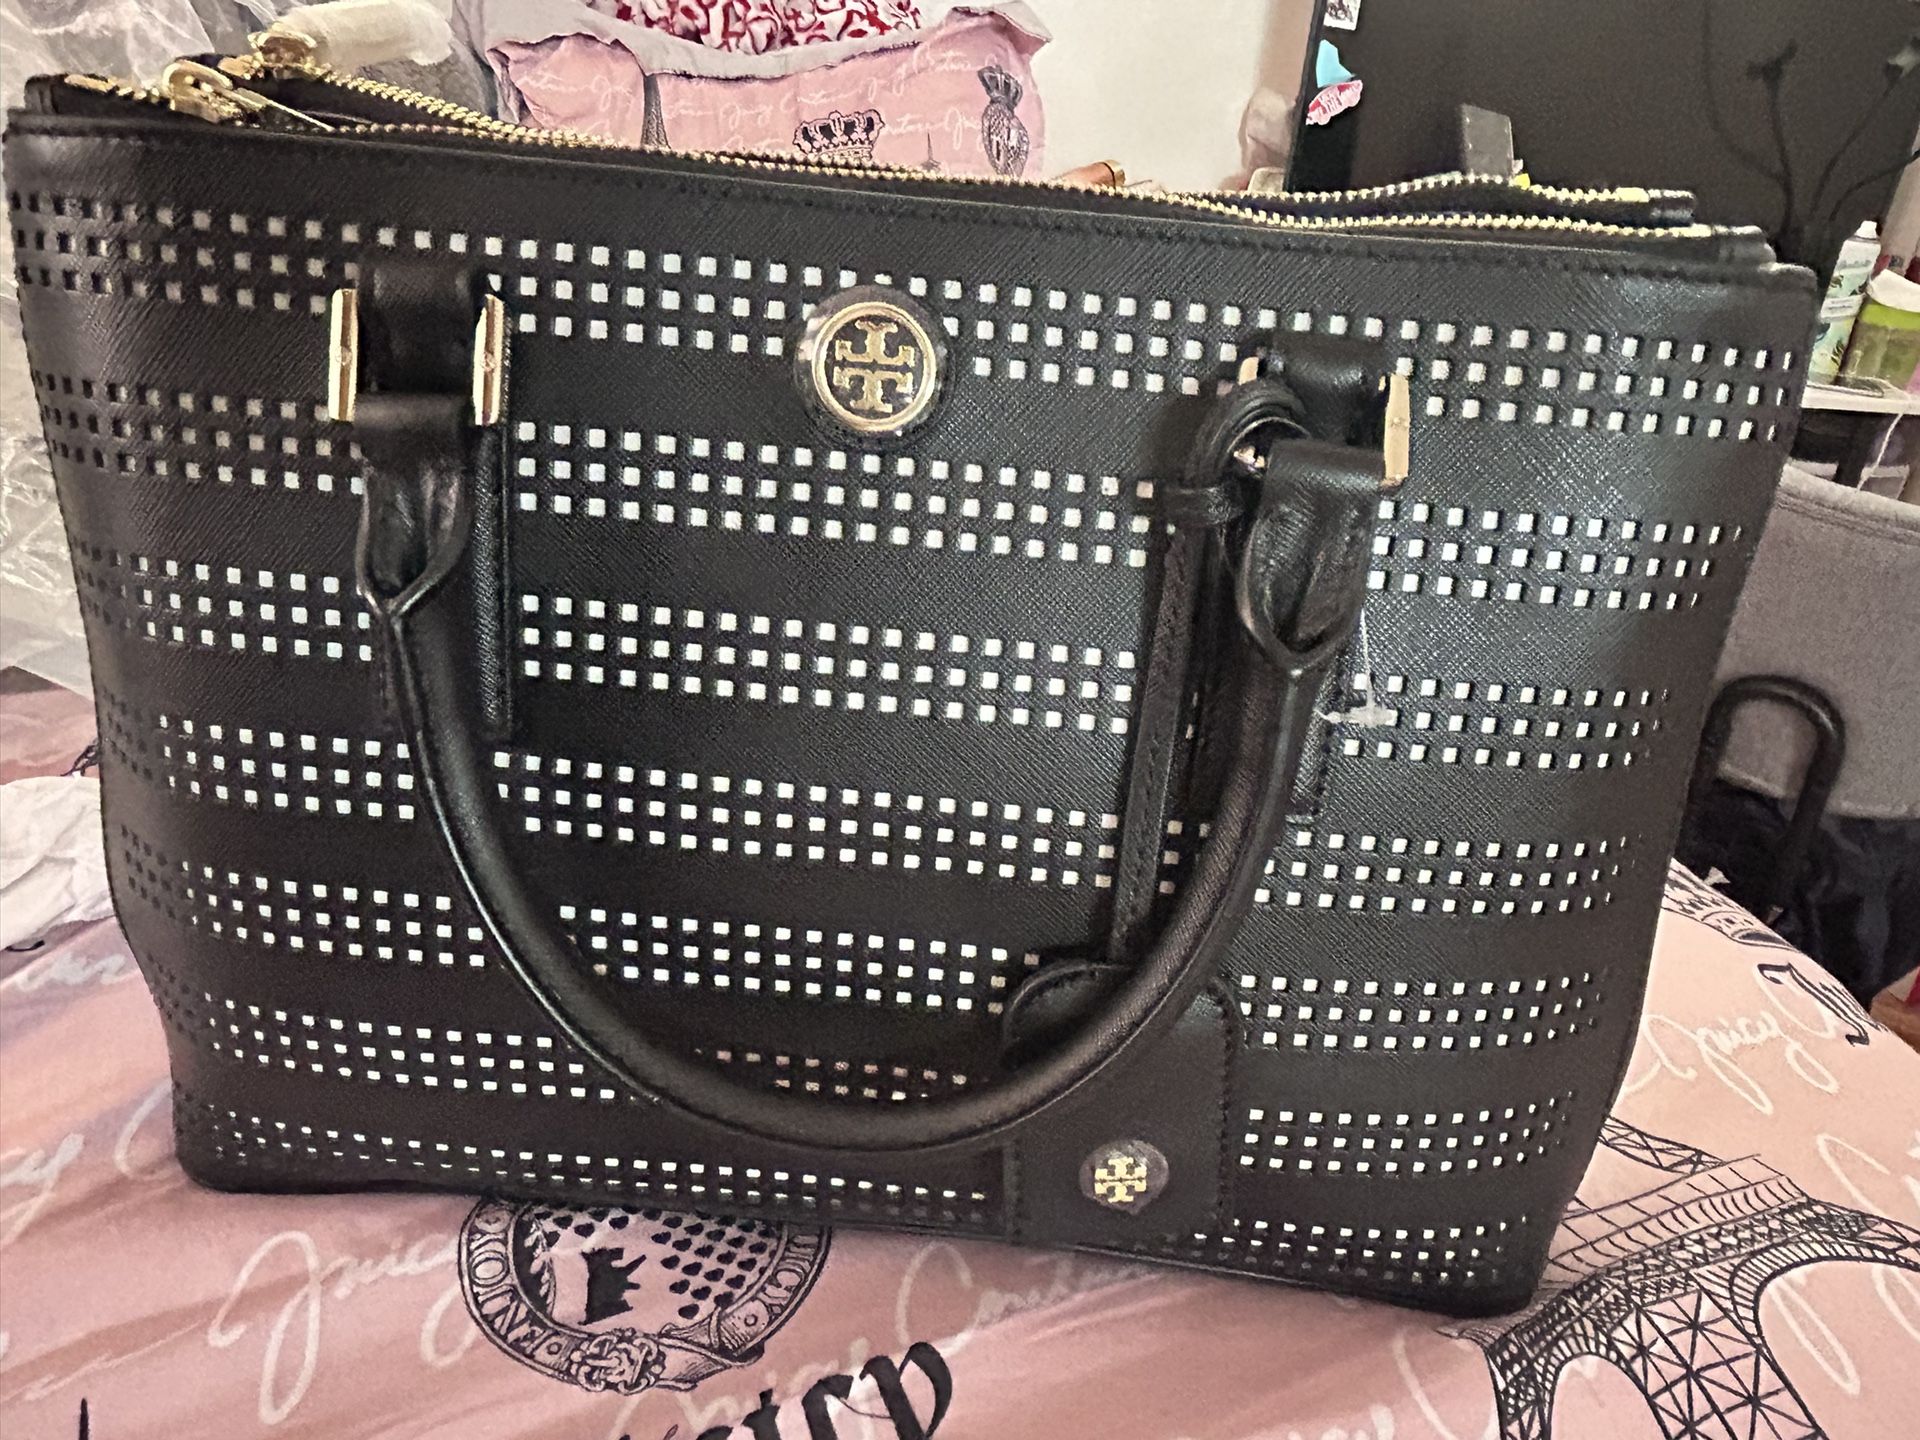 new tory burch never used with dust bag included